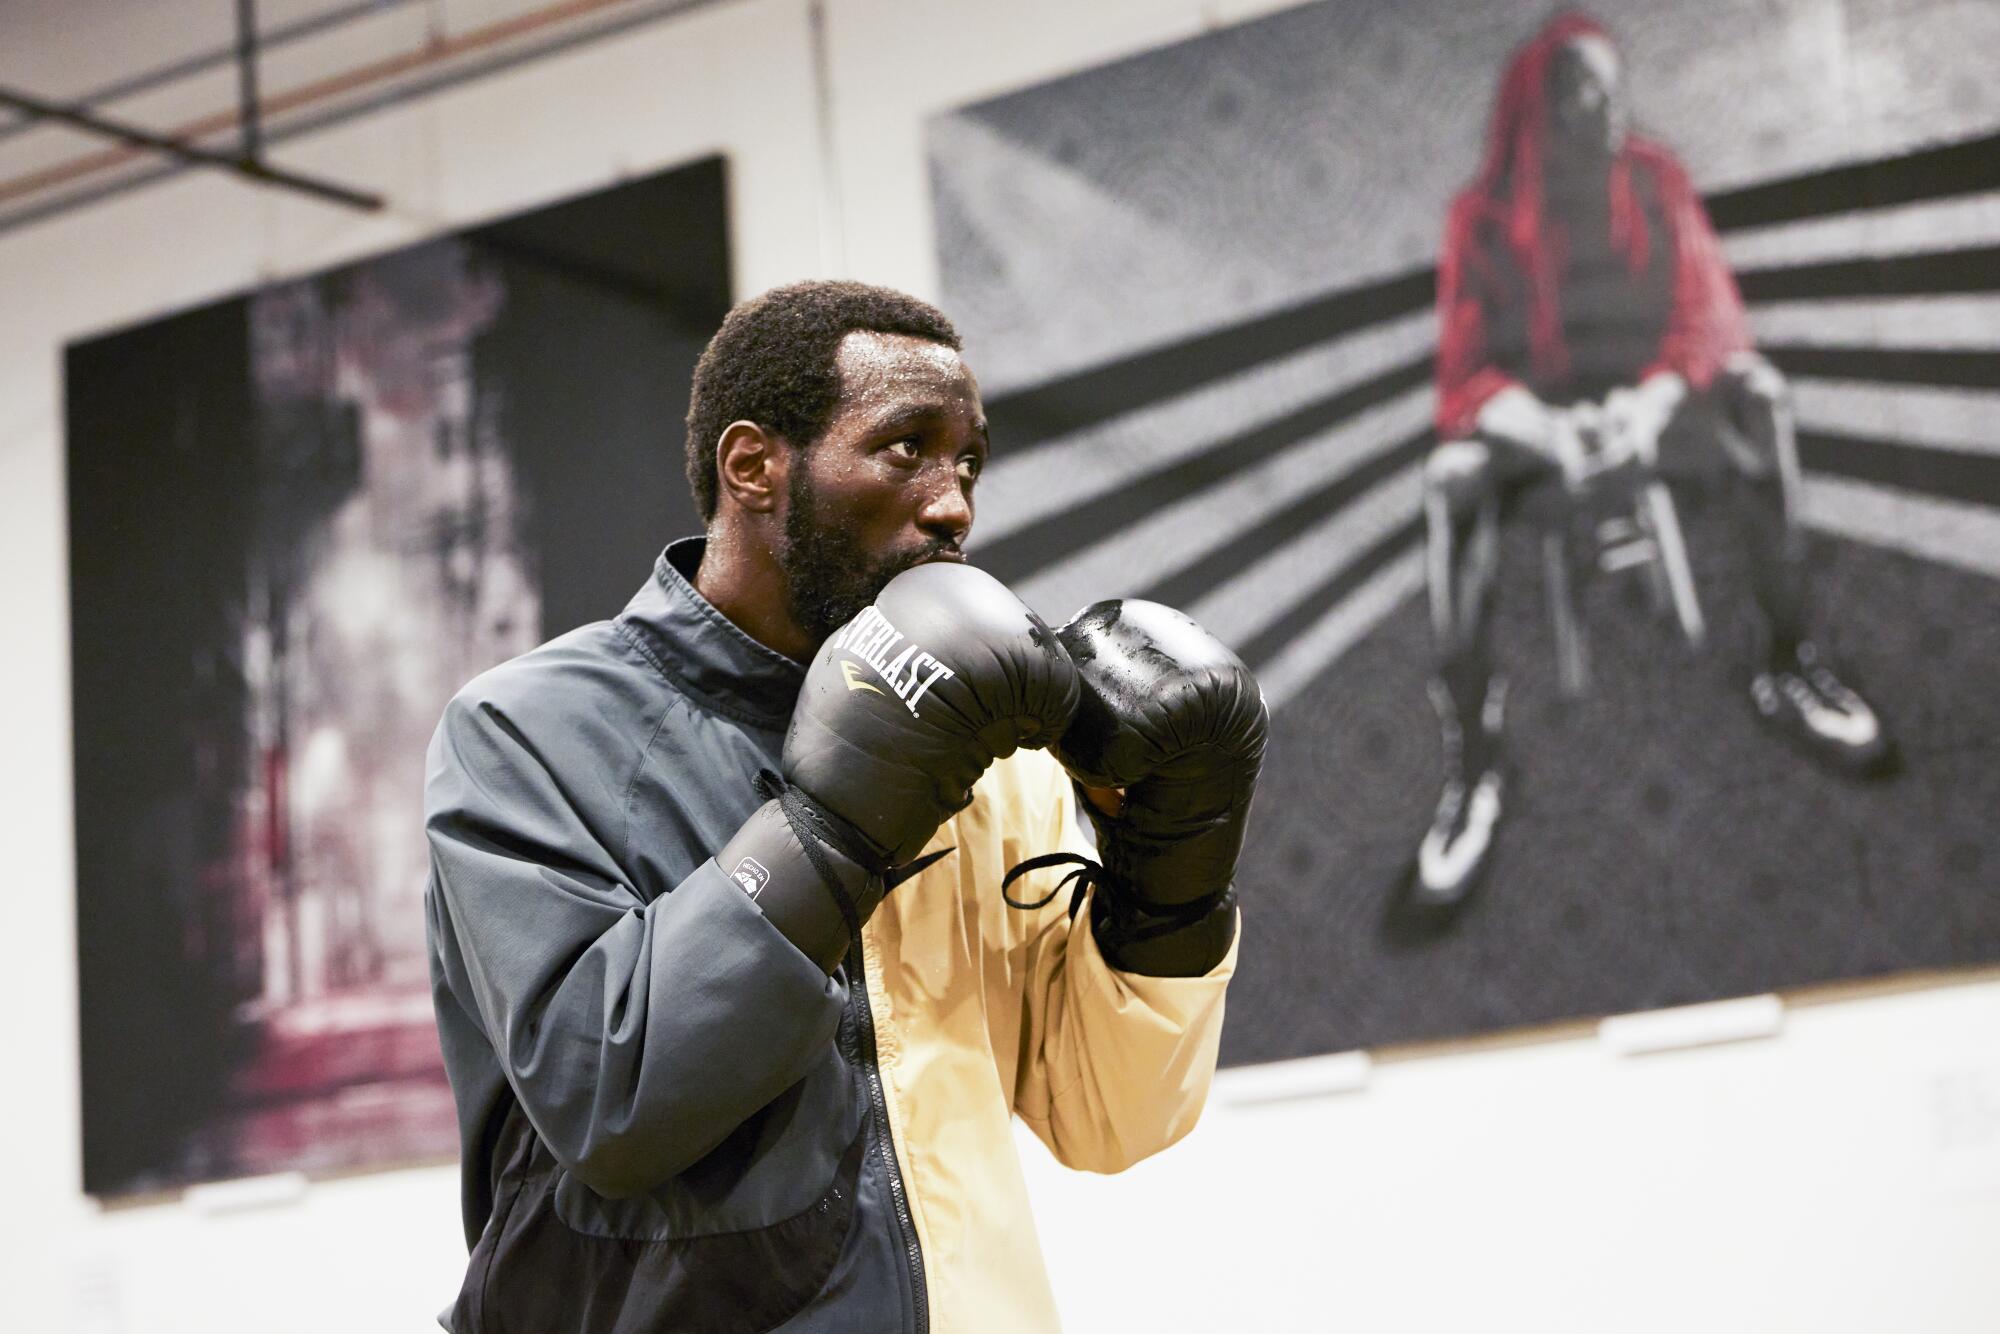 Terence "Bud" Crawford during a training session at the Triple Threat Boxing Gym